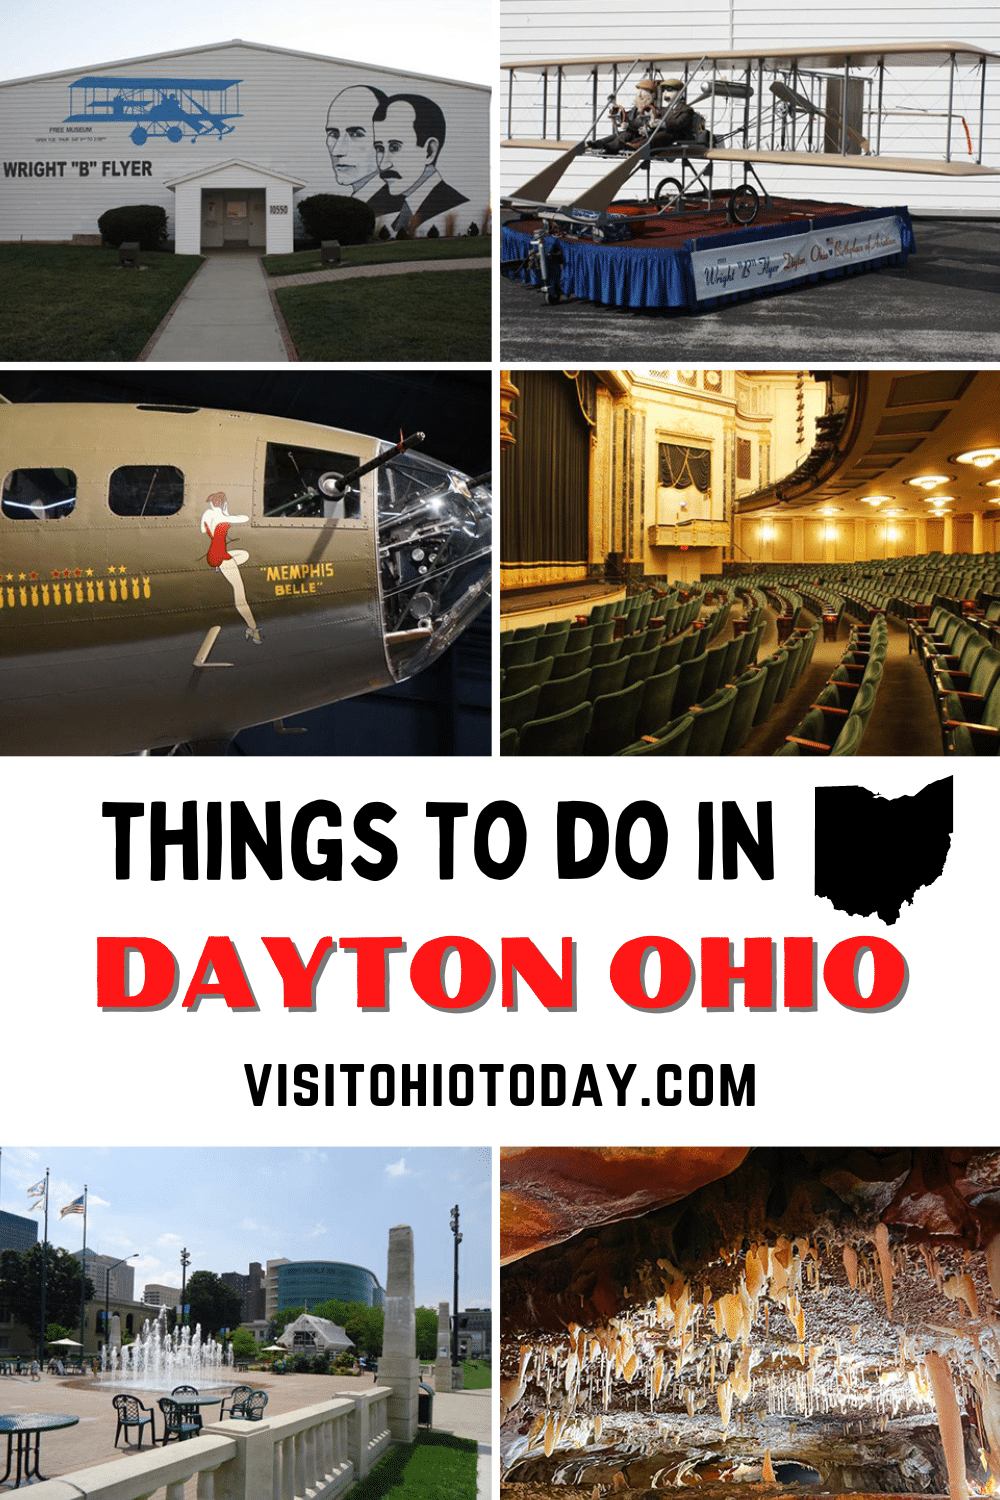 Dayton Ohio is known as the home of the Wright Brothers, and there are plenty of things to do in Dayton Ohio in Montgomery County. With a rich history, Dayton has museums and archaeological places of interest, as well as lots of outdoor activity centers.